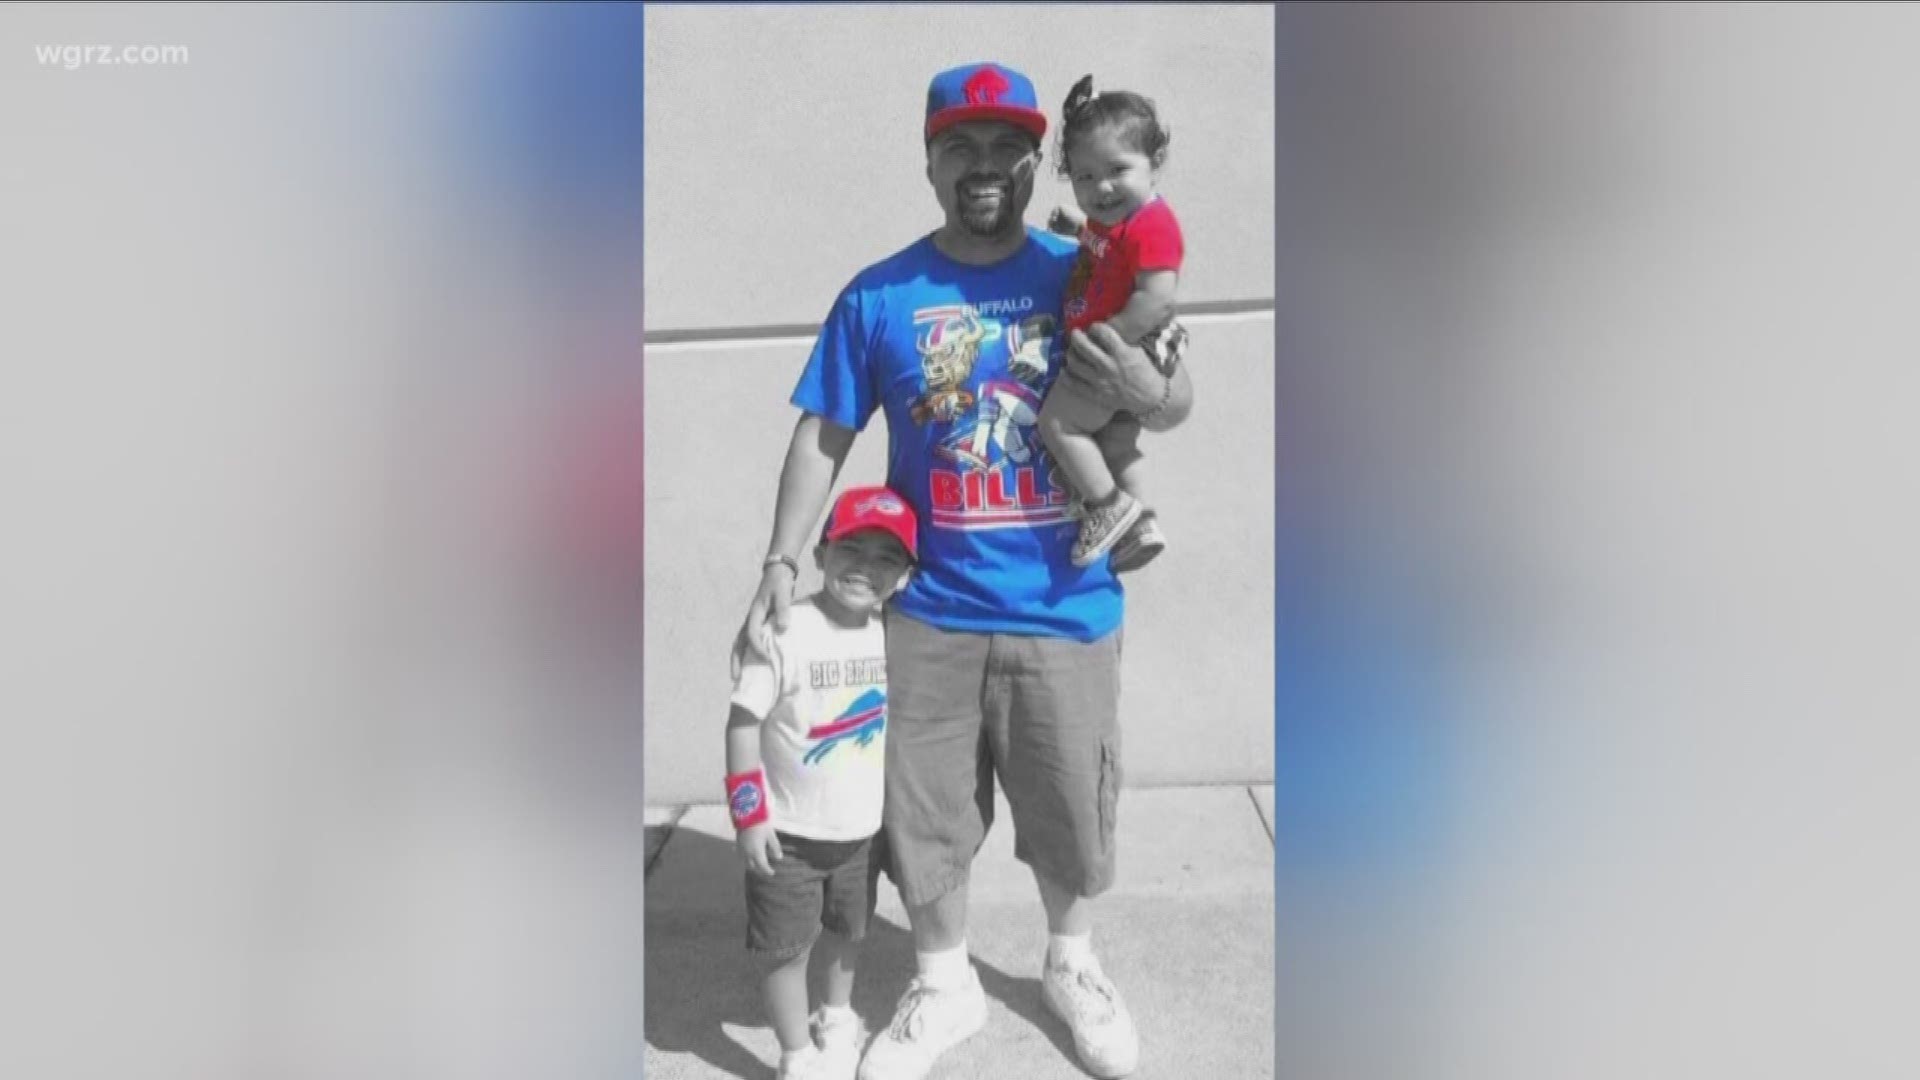 Bills Mafia members are donating to two causes that were close to the heart of Ezra Castro, the superfan known as Pancho Billa